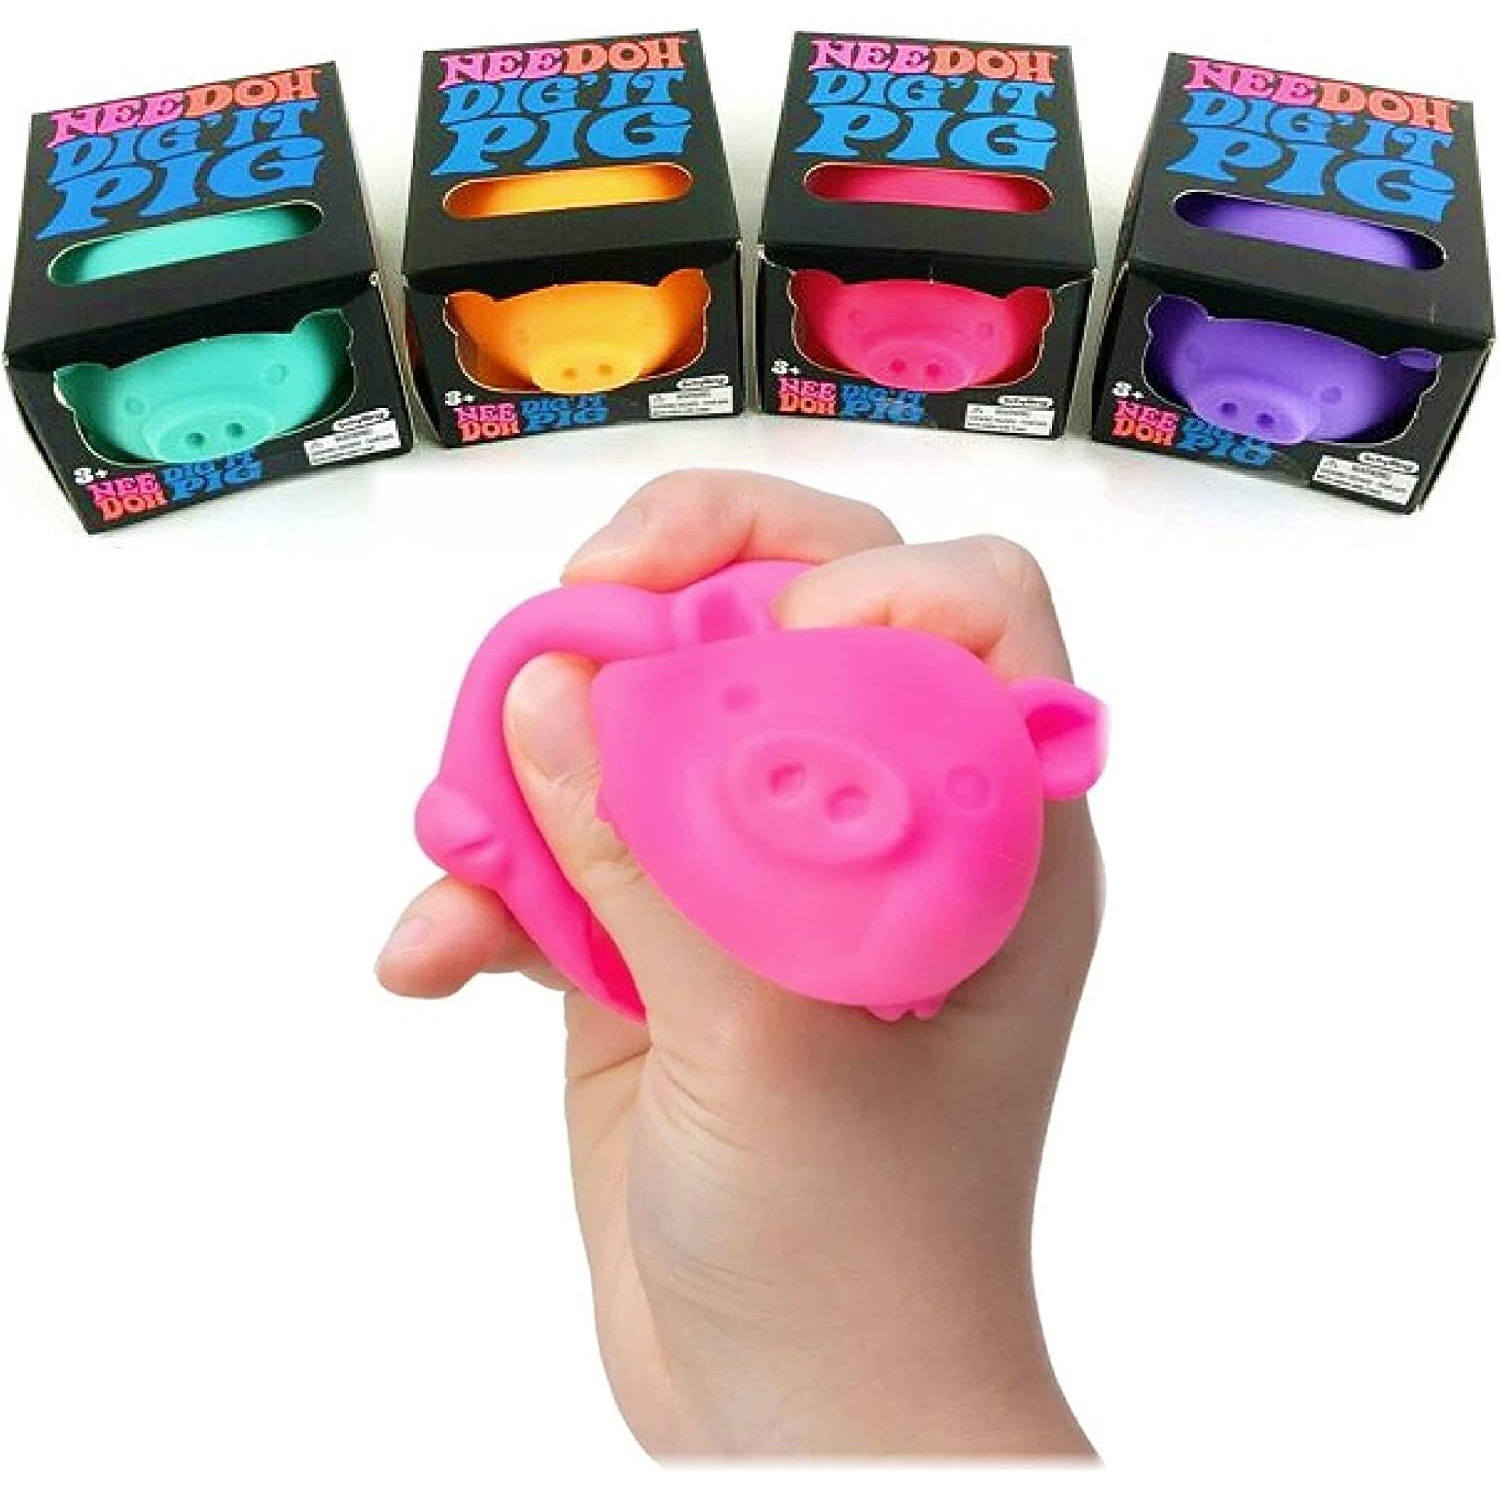 Schylling NeeDoh Dig' It Pig...Groovy Glob! - Assorted Colors-SCHYLLING-Little Giant Kidz